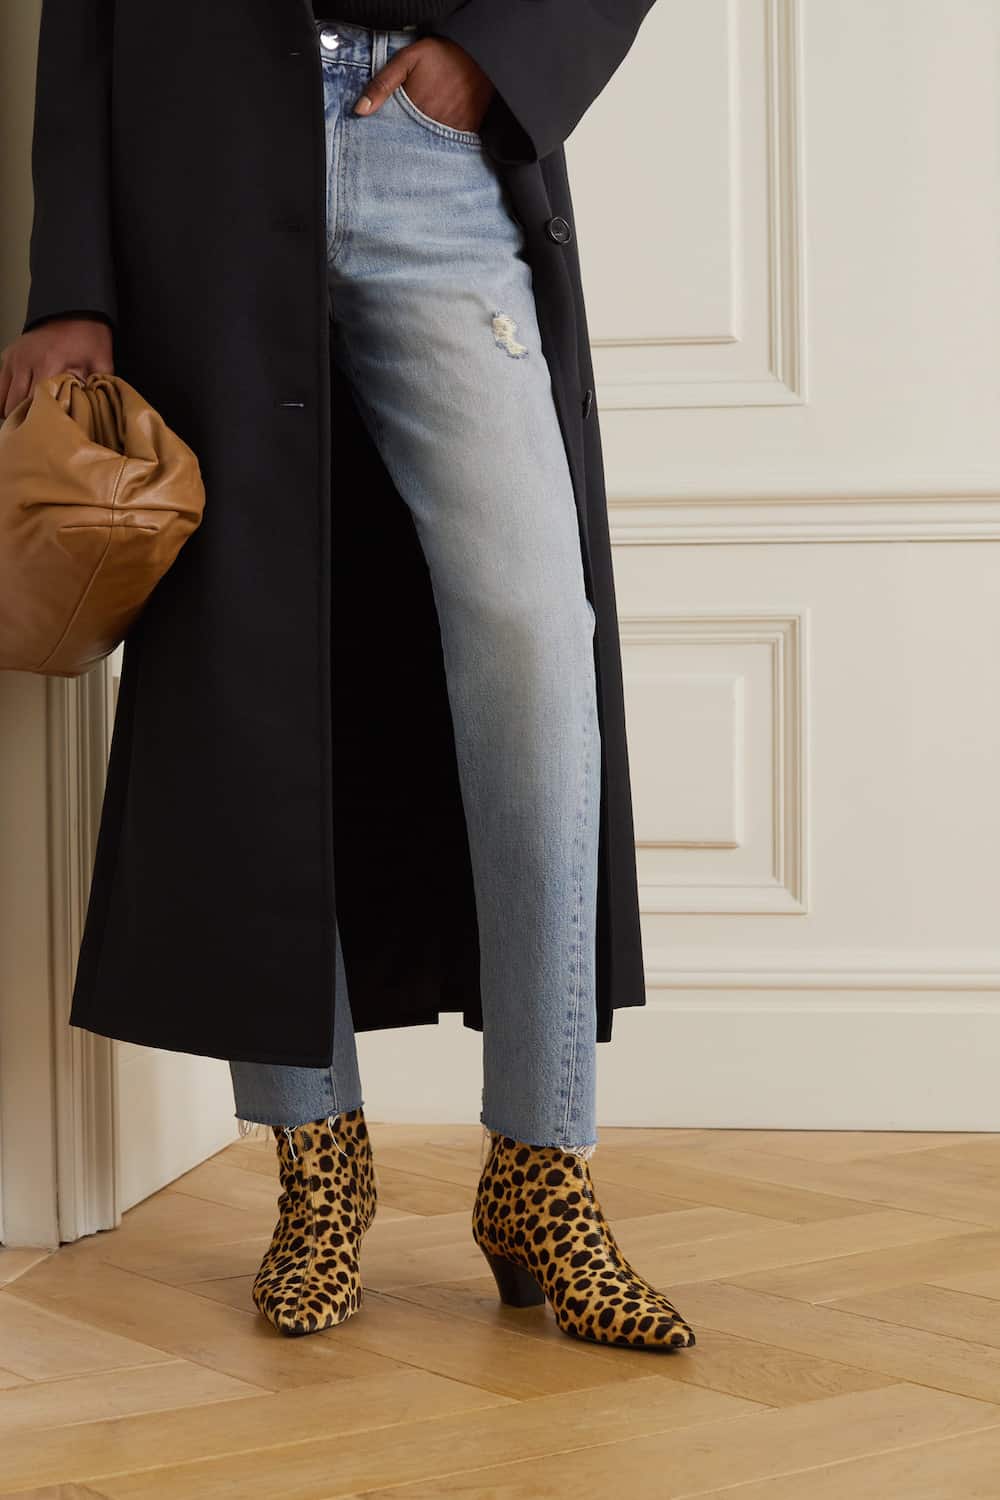 image of a woman wearing faded blue jeans, a black coat, and cheetah print ankle boots